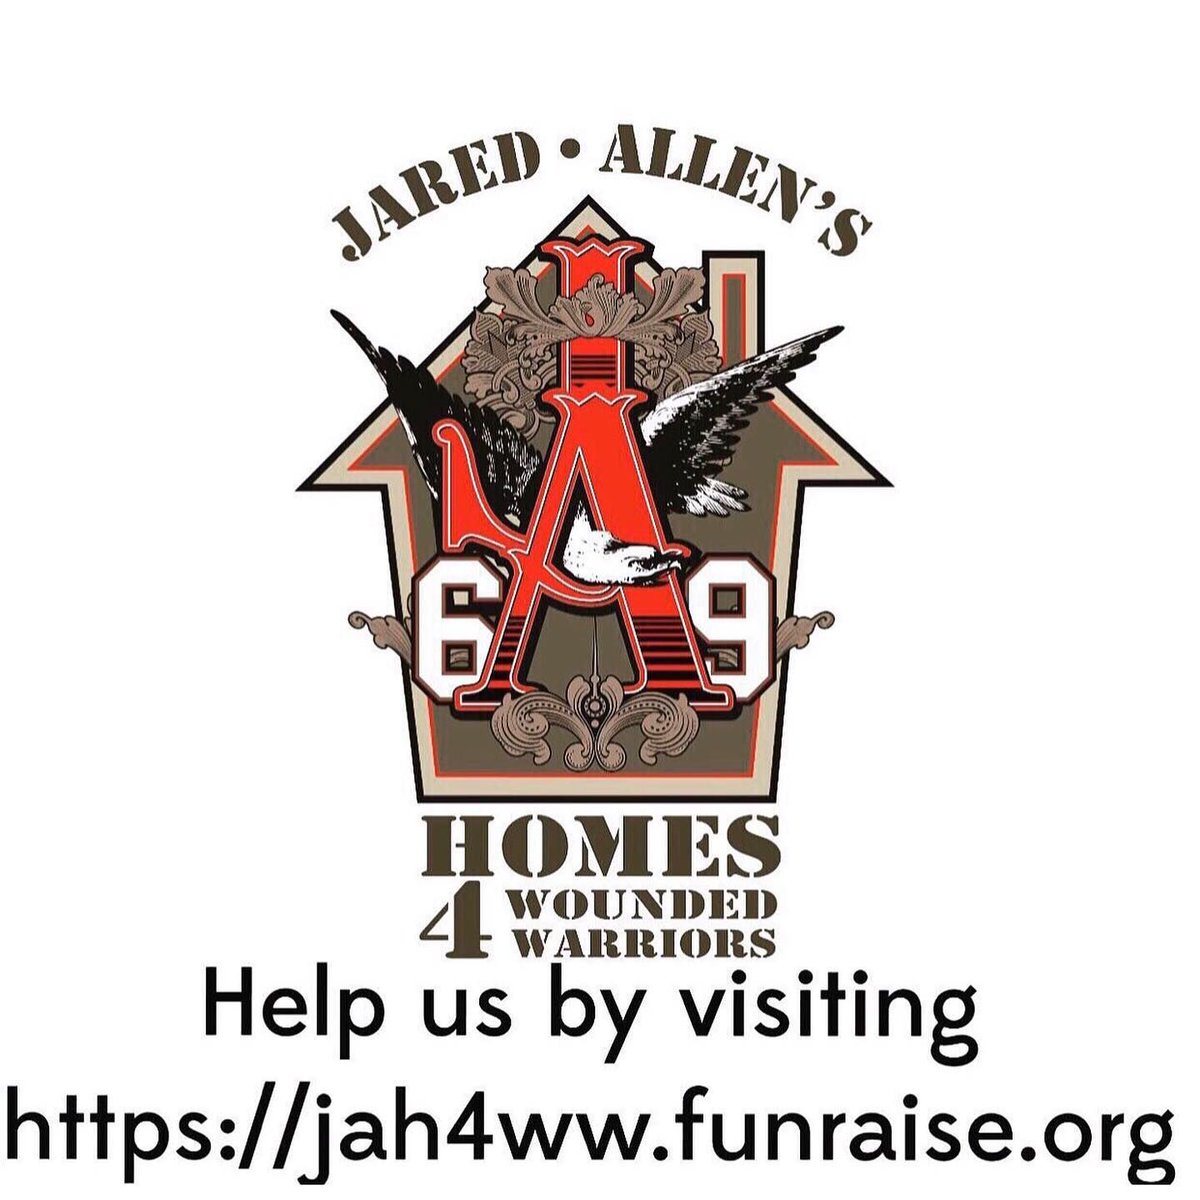 Jared Allen's Homes for Wounded Warriors @JAH4WW
MISSION:
Raise money to build and remodel injury-specific, accessible & mortgage-free homes for our injured  Iraq and Afghanistan  Veterans 
homesforwoundedwarriors.com
FB facebook.com/jah4ww 
@GarySinise @andyoaklee @jaredallen69